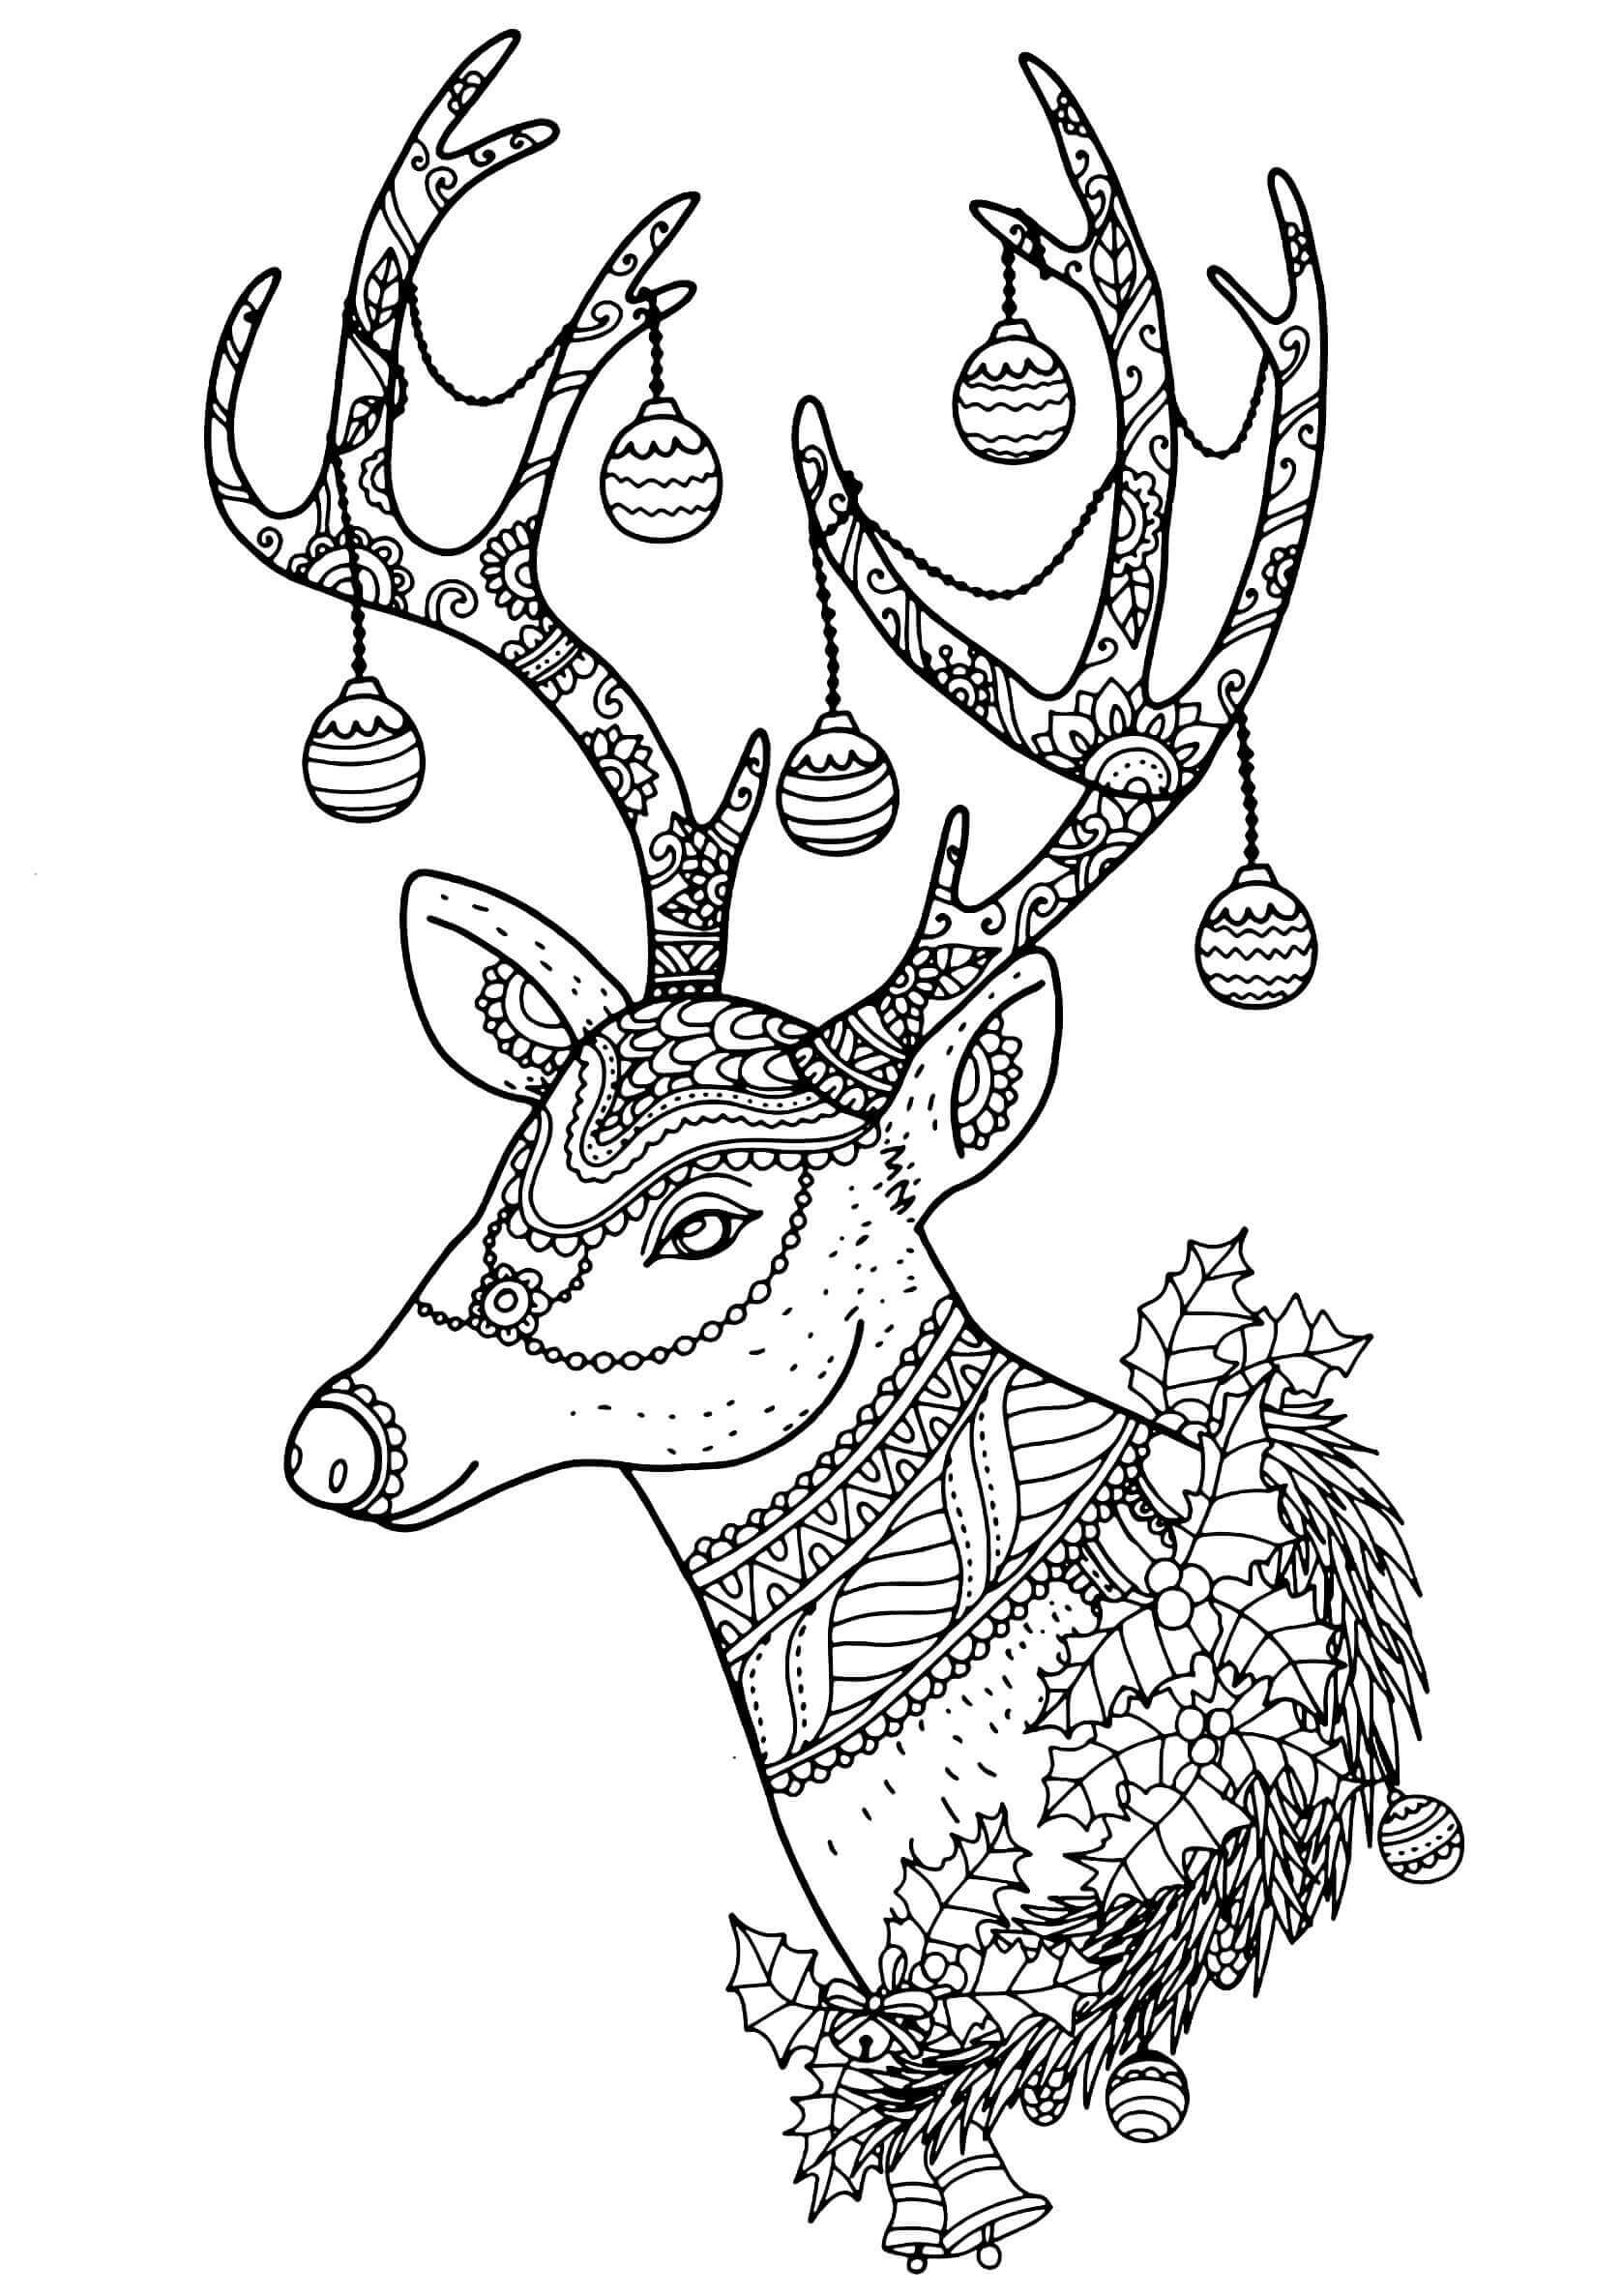 Pattern Reindeer Coloring Pages for Adults